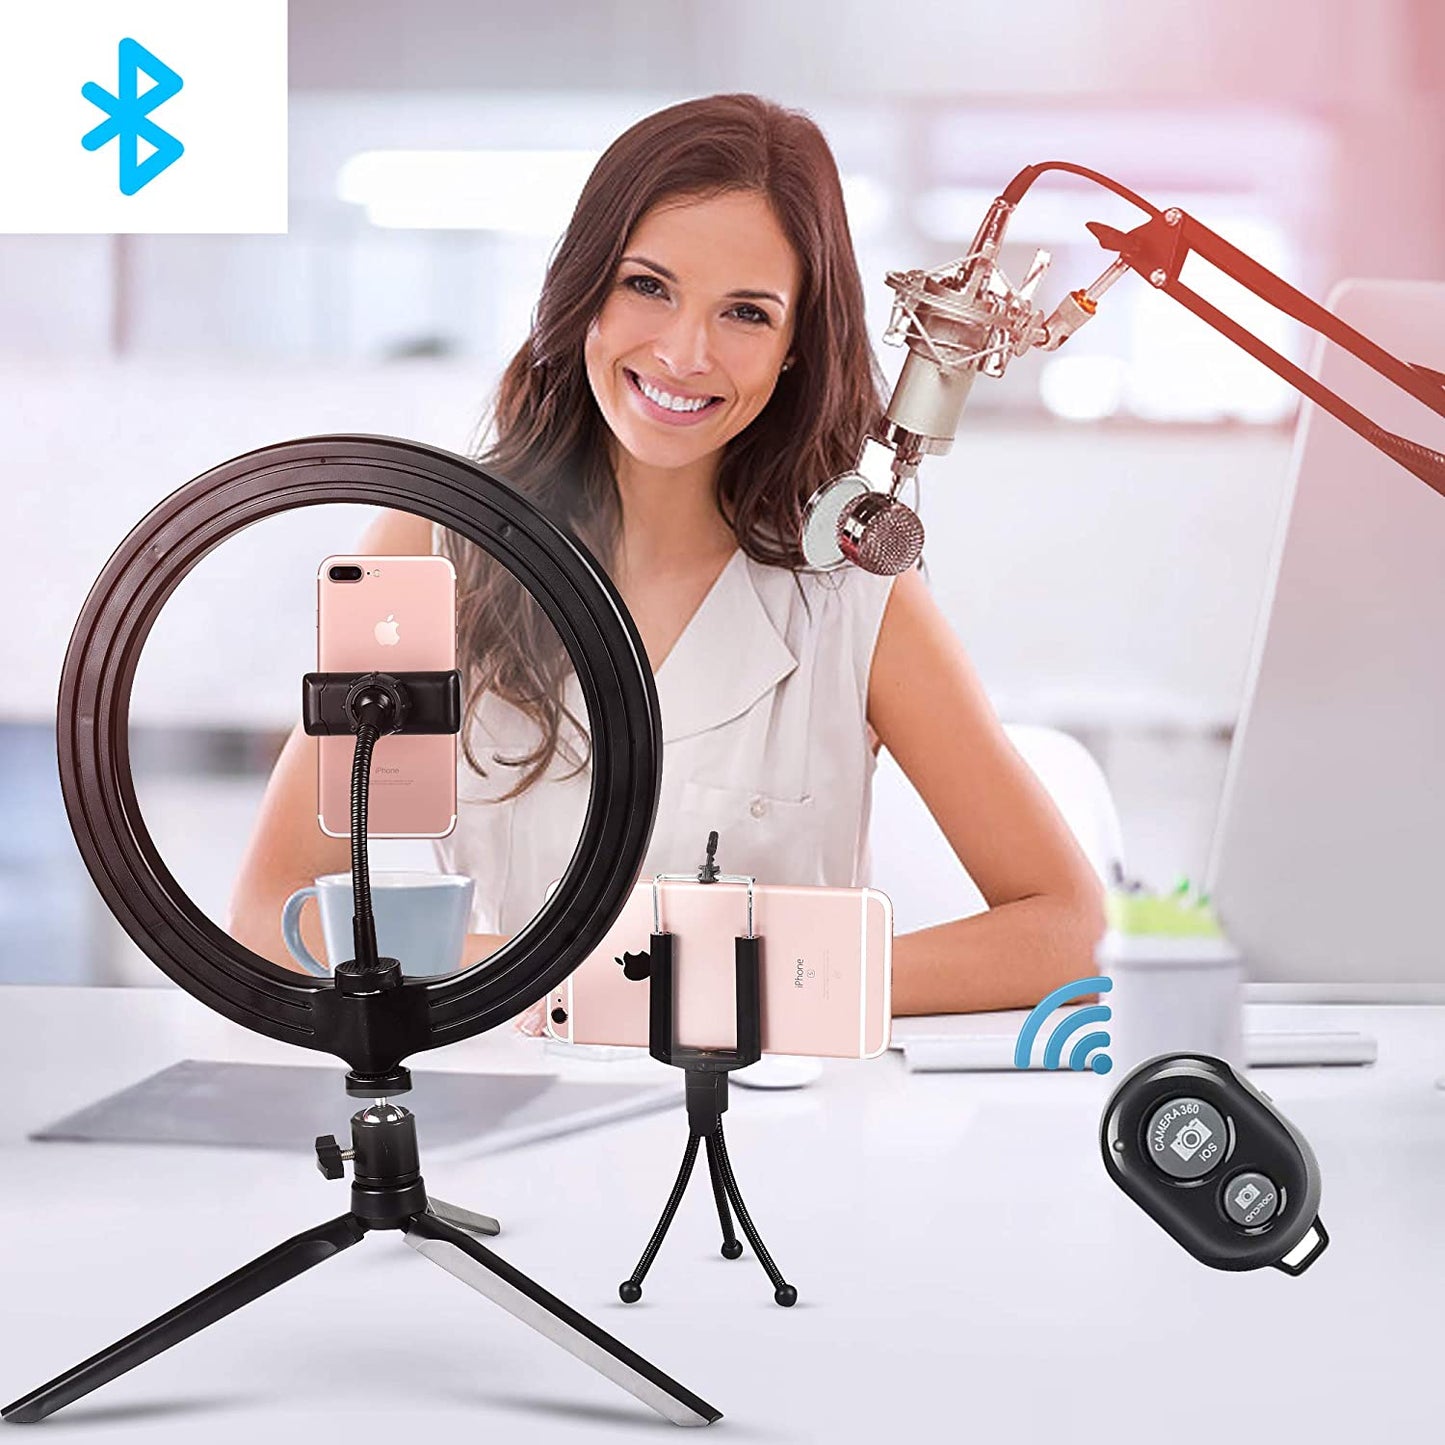 10inch LED Desktop Selfie Ring Light with 3 Modes- Battery Operated_2